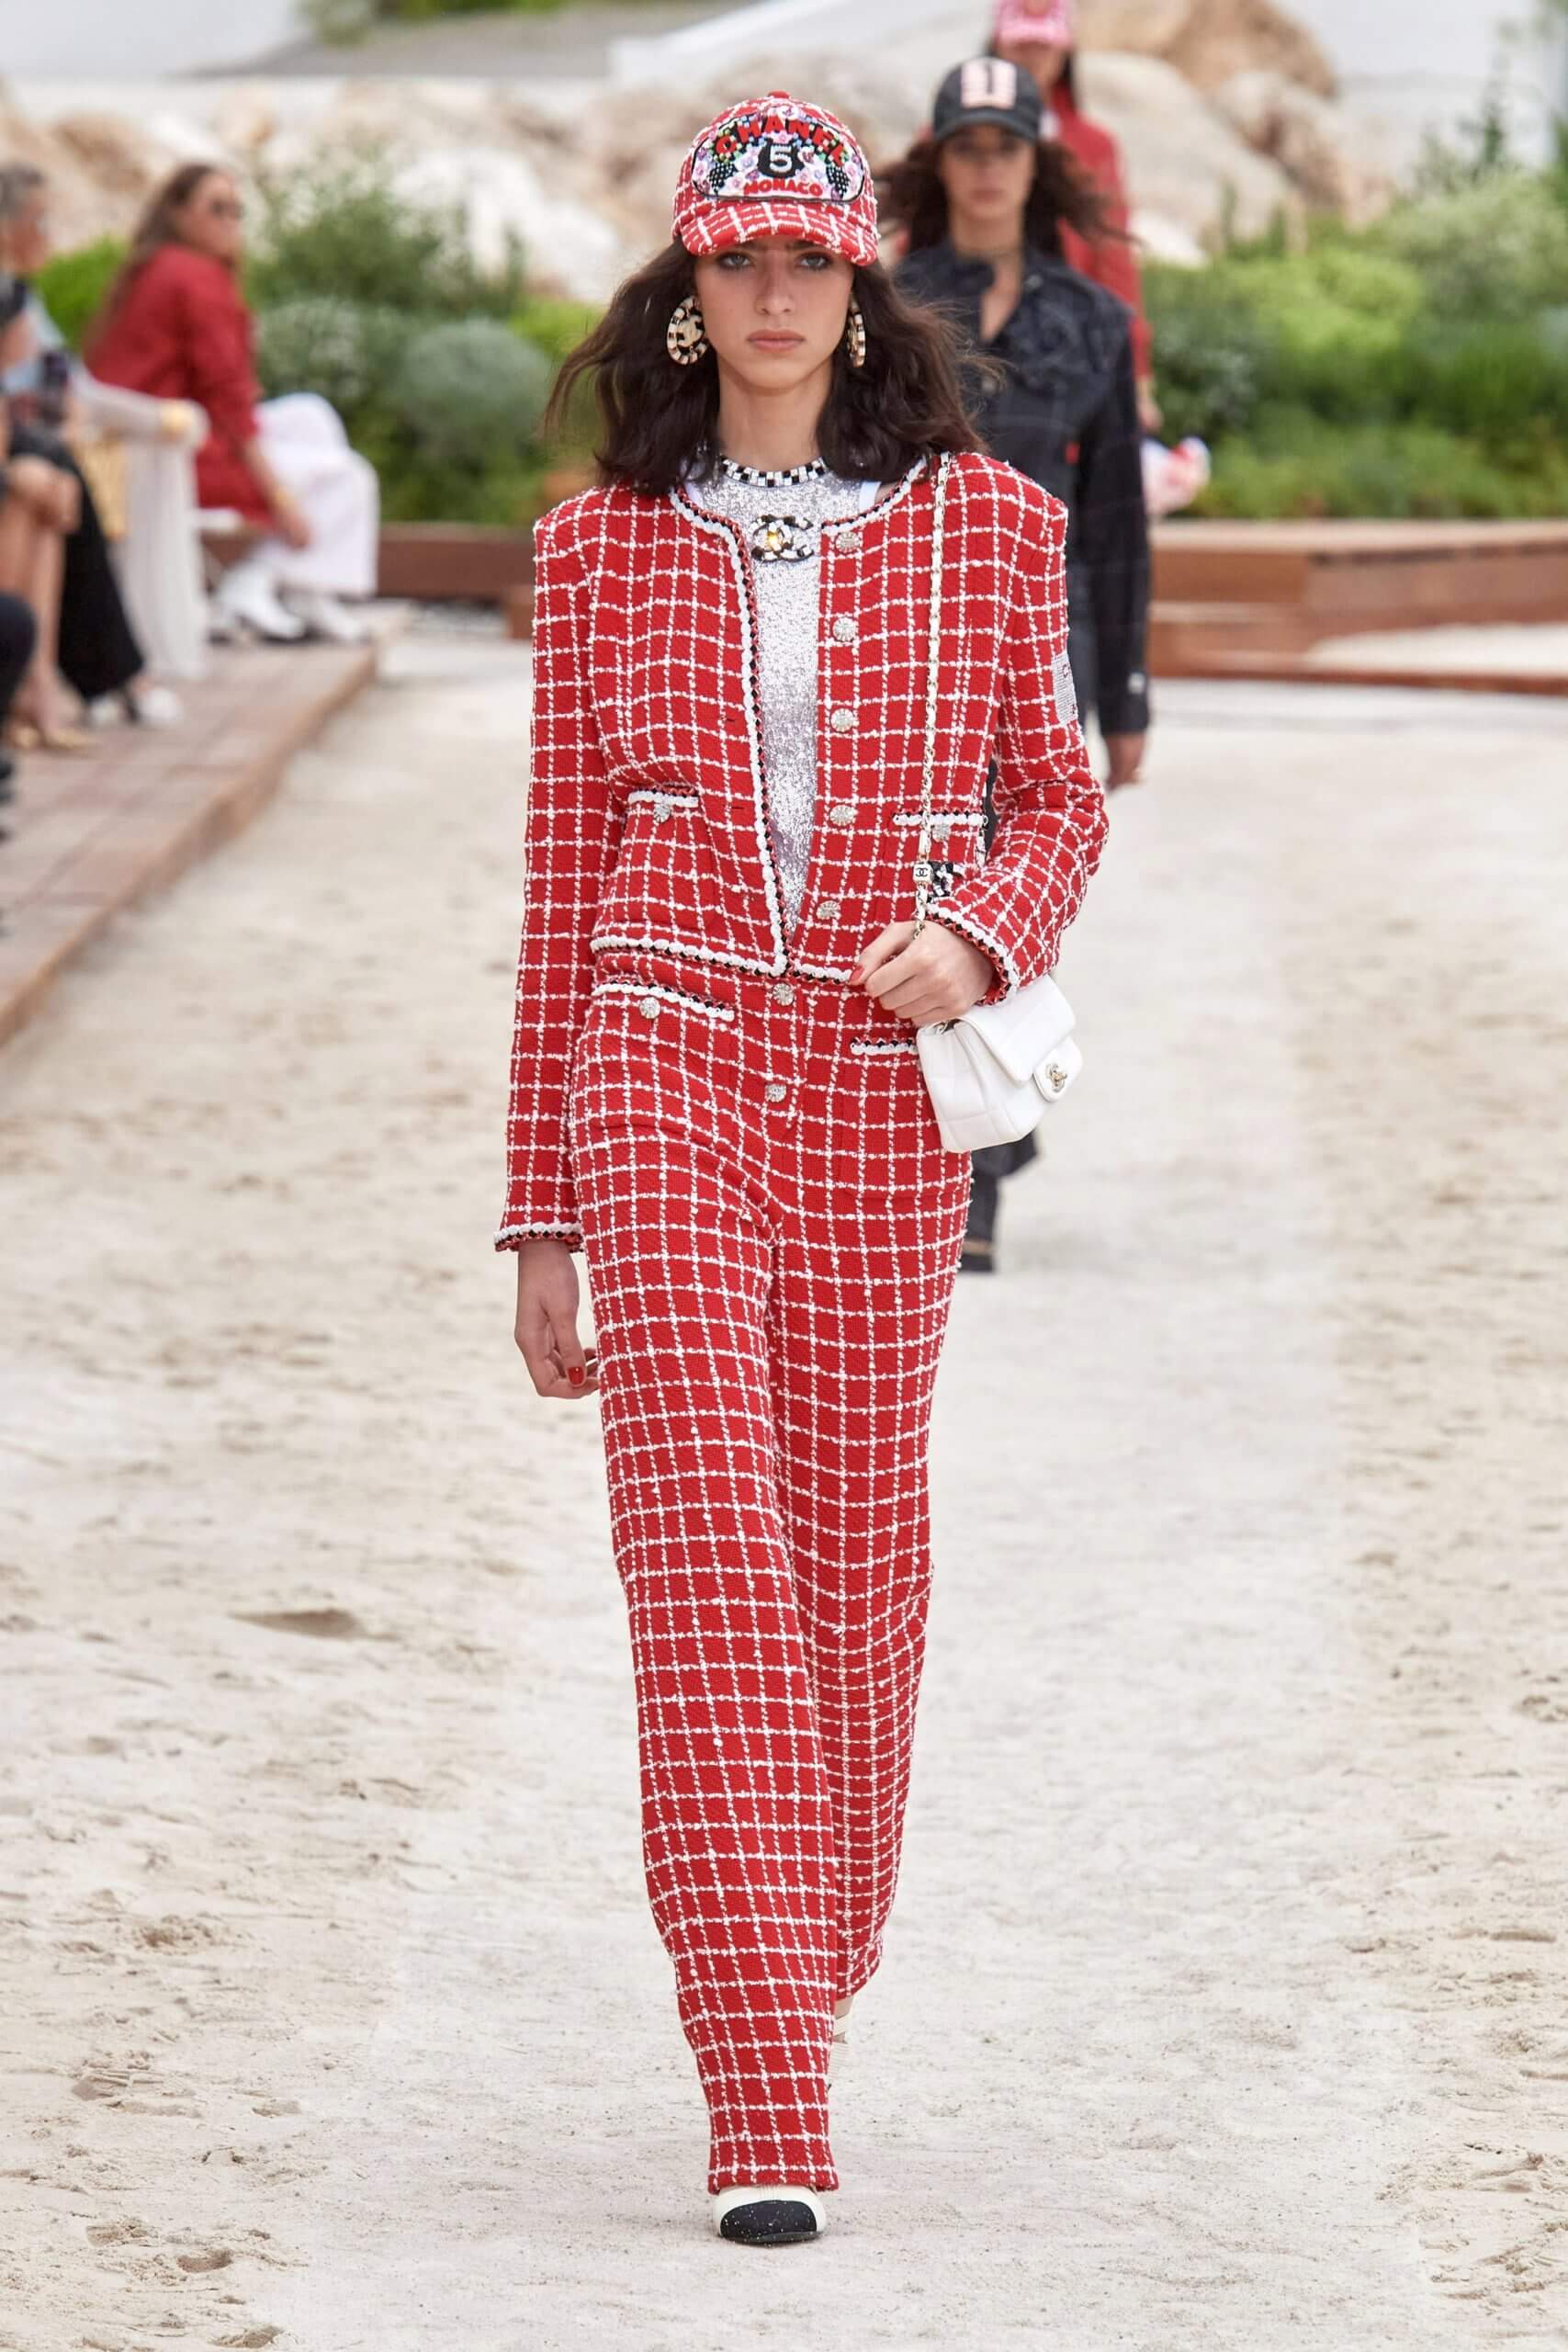 Chanel Cruise To Return To Miami After 14 Years